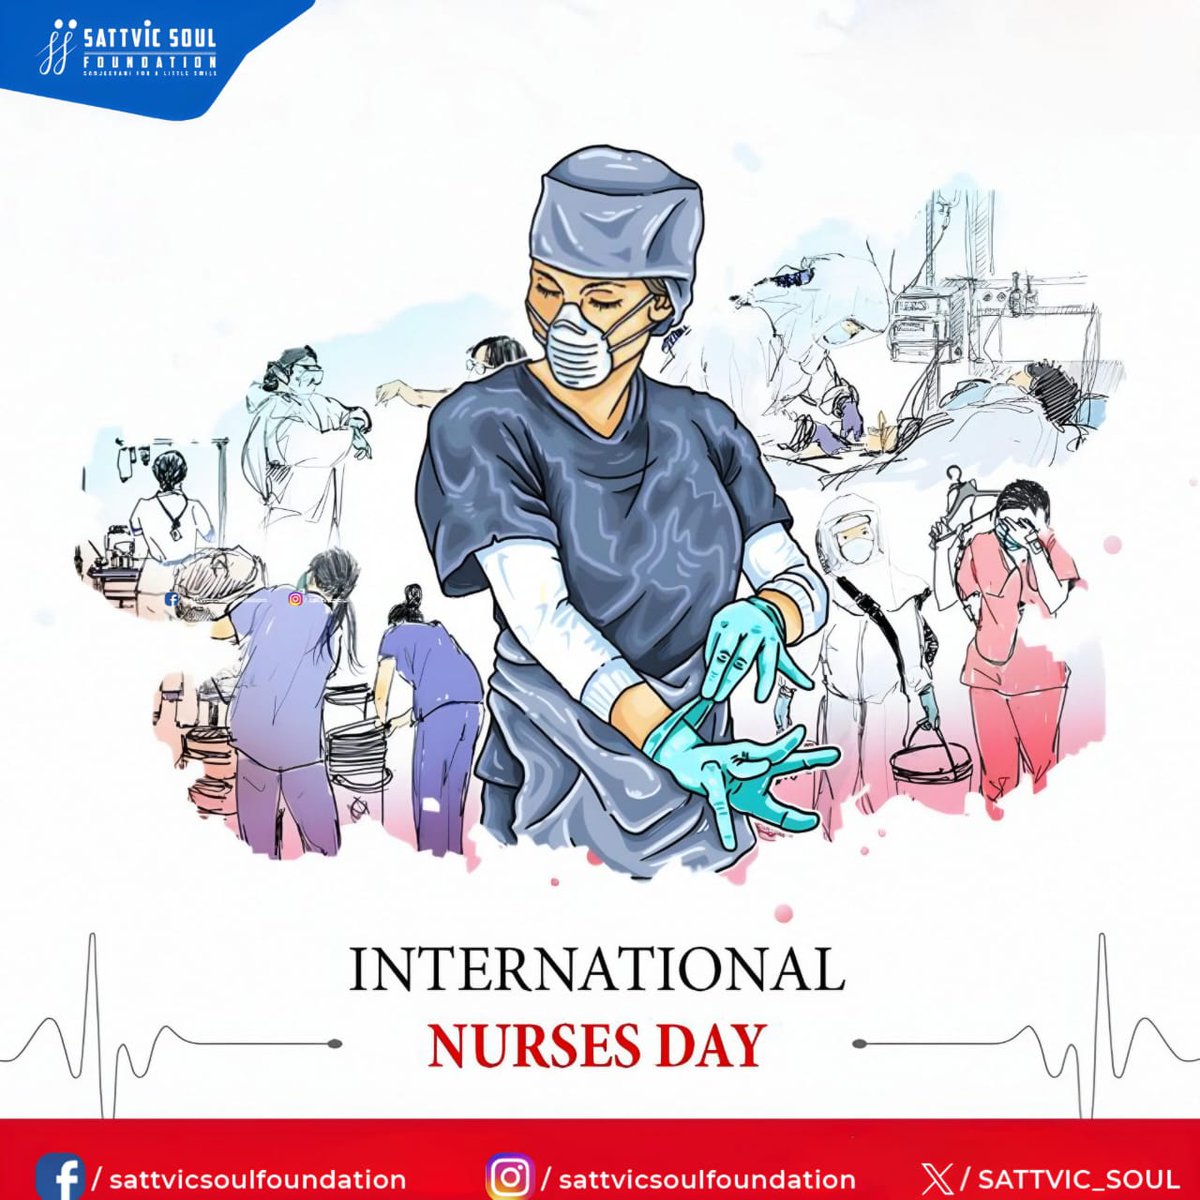 Happy #InternationalNursesDay 👩🏼‍⚕ to the amazing nurses around the globe! Your kindness, expertise, and tireless dedication inspire us all. Today and every day, we salute your invaluable contributions to healthcare and healing. Thank you for your compassion and commitment!🫡🩺